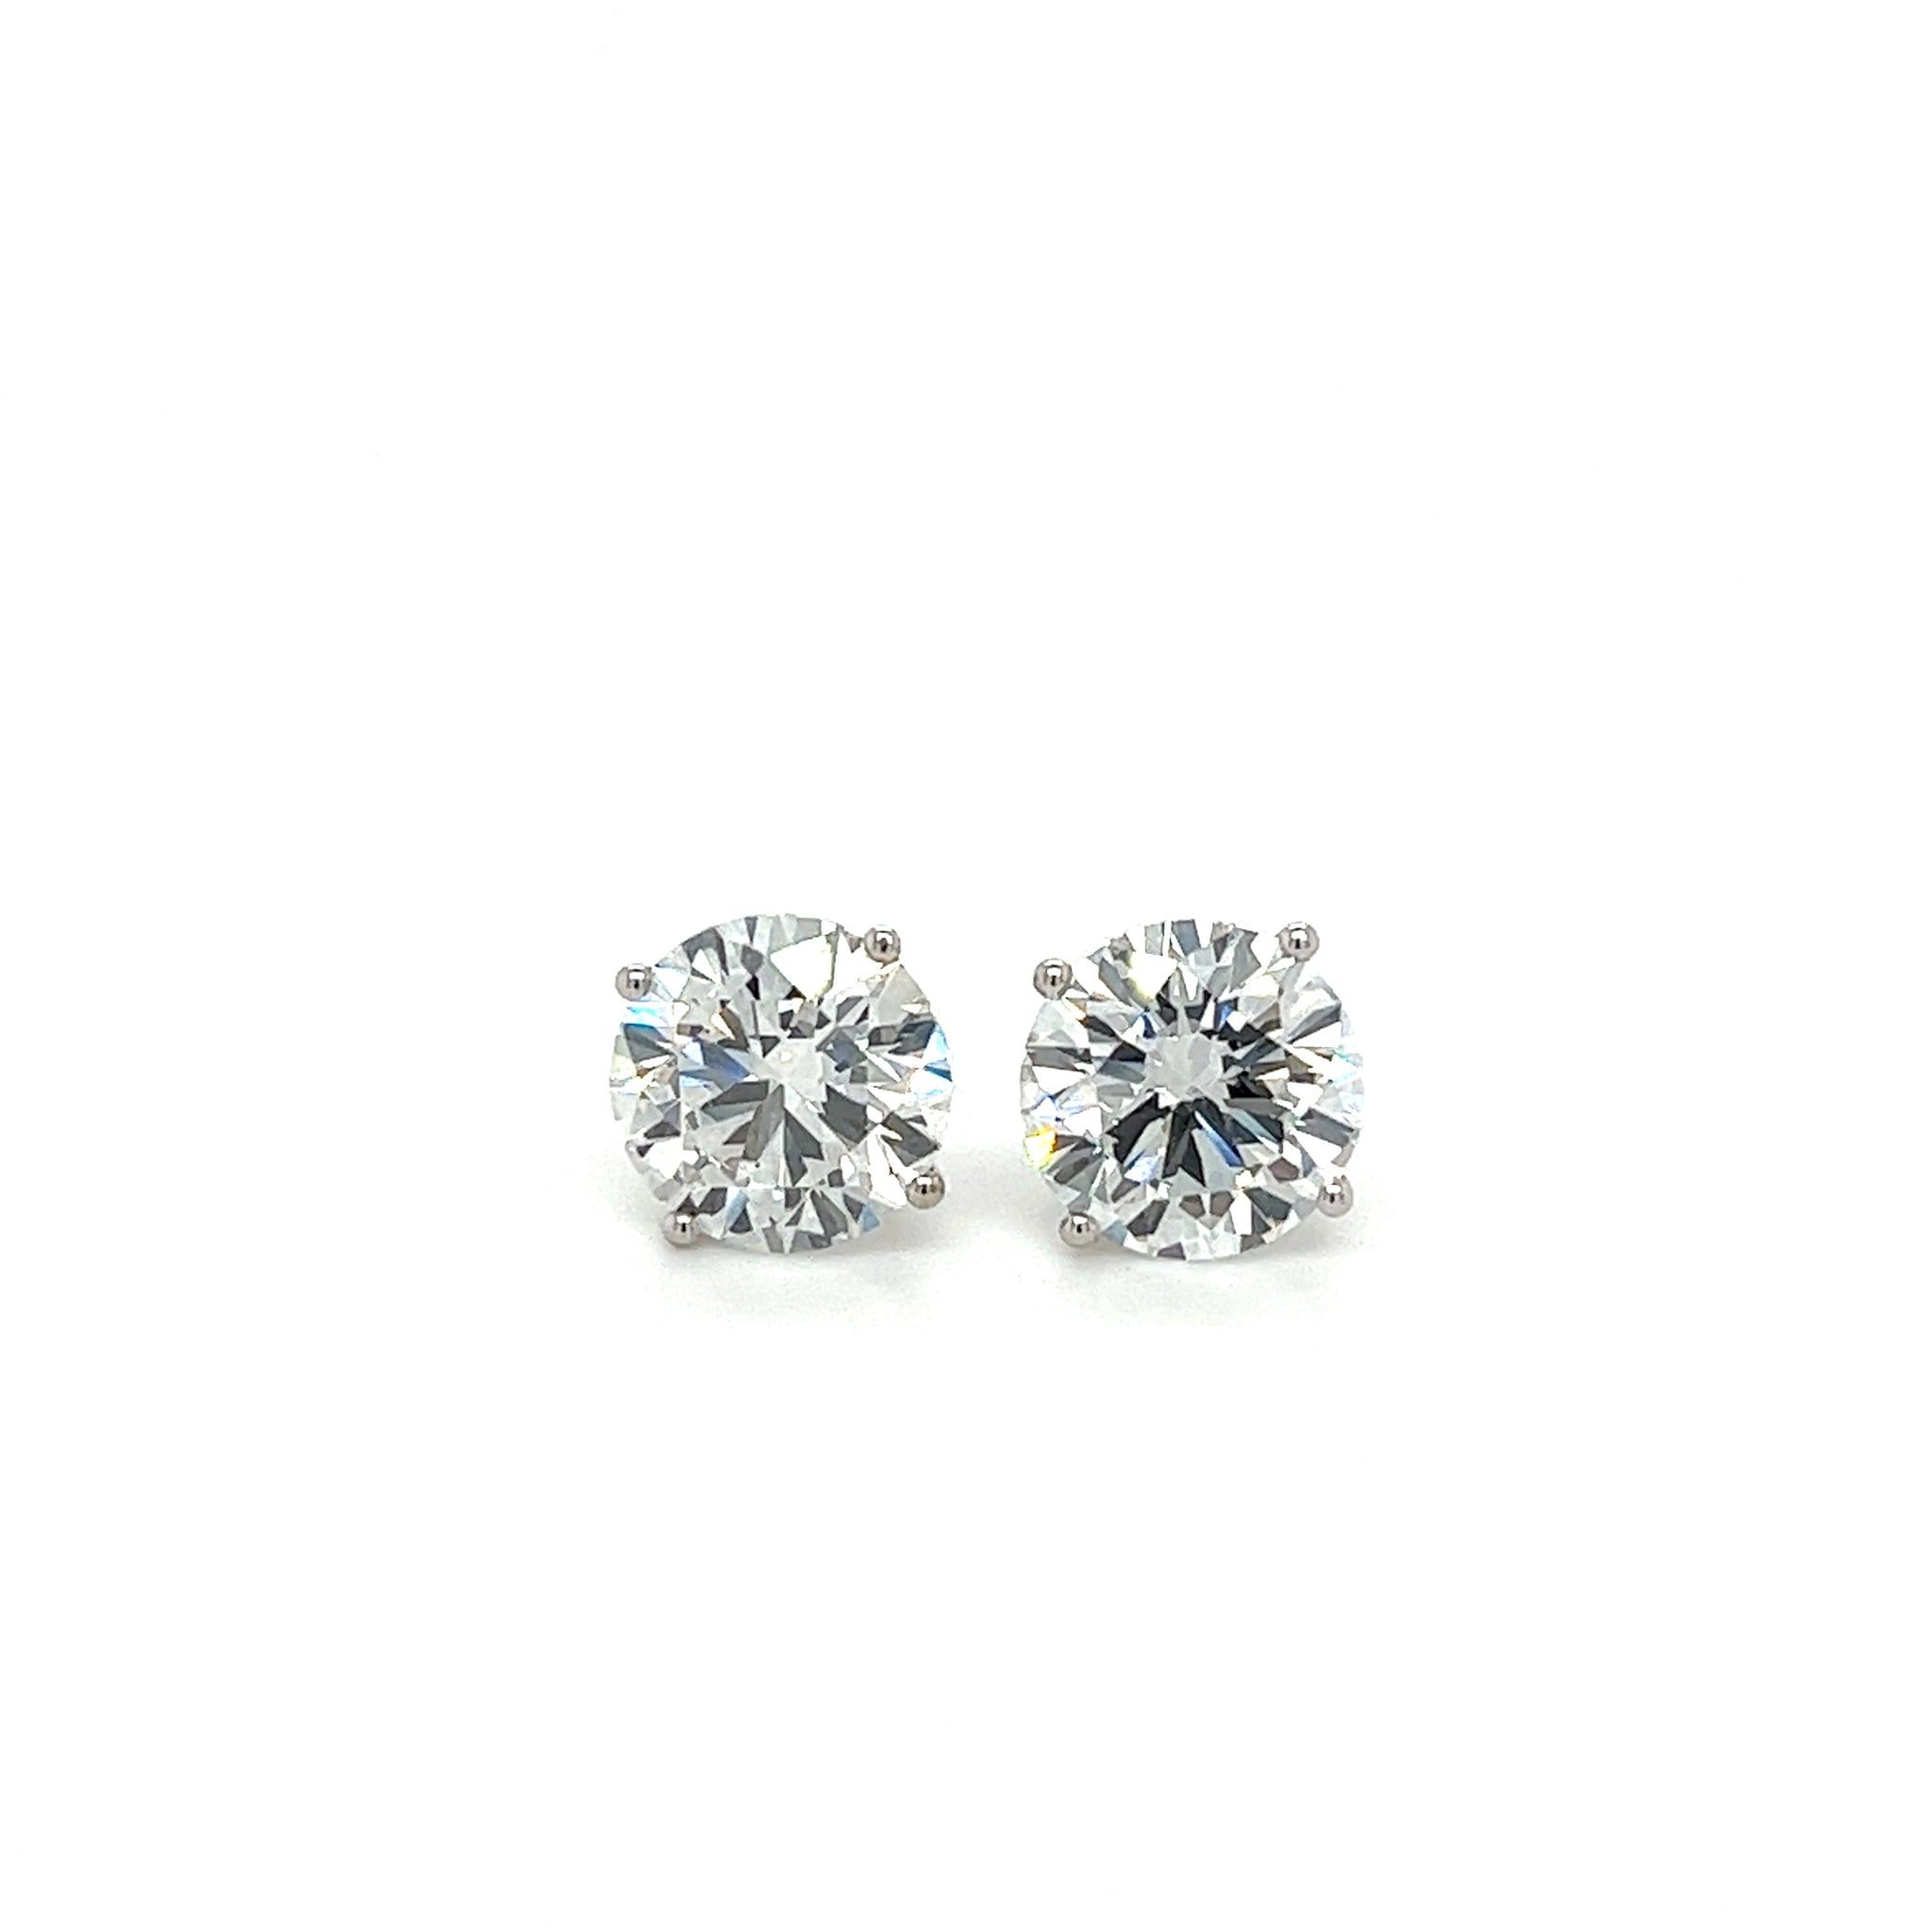 3.51 CTTW Round Lab Grown Diamond Stud Earrings in 4-Prong Martini Setting